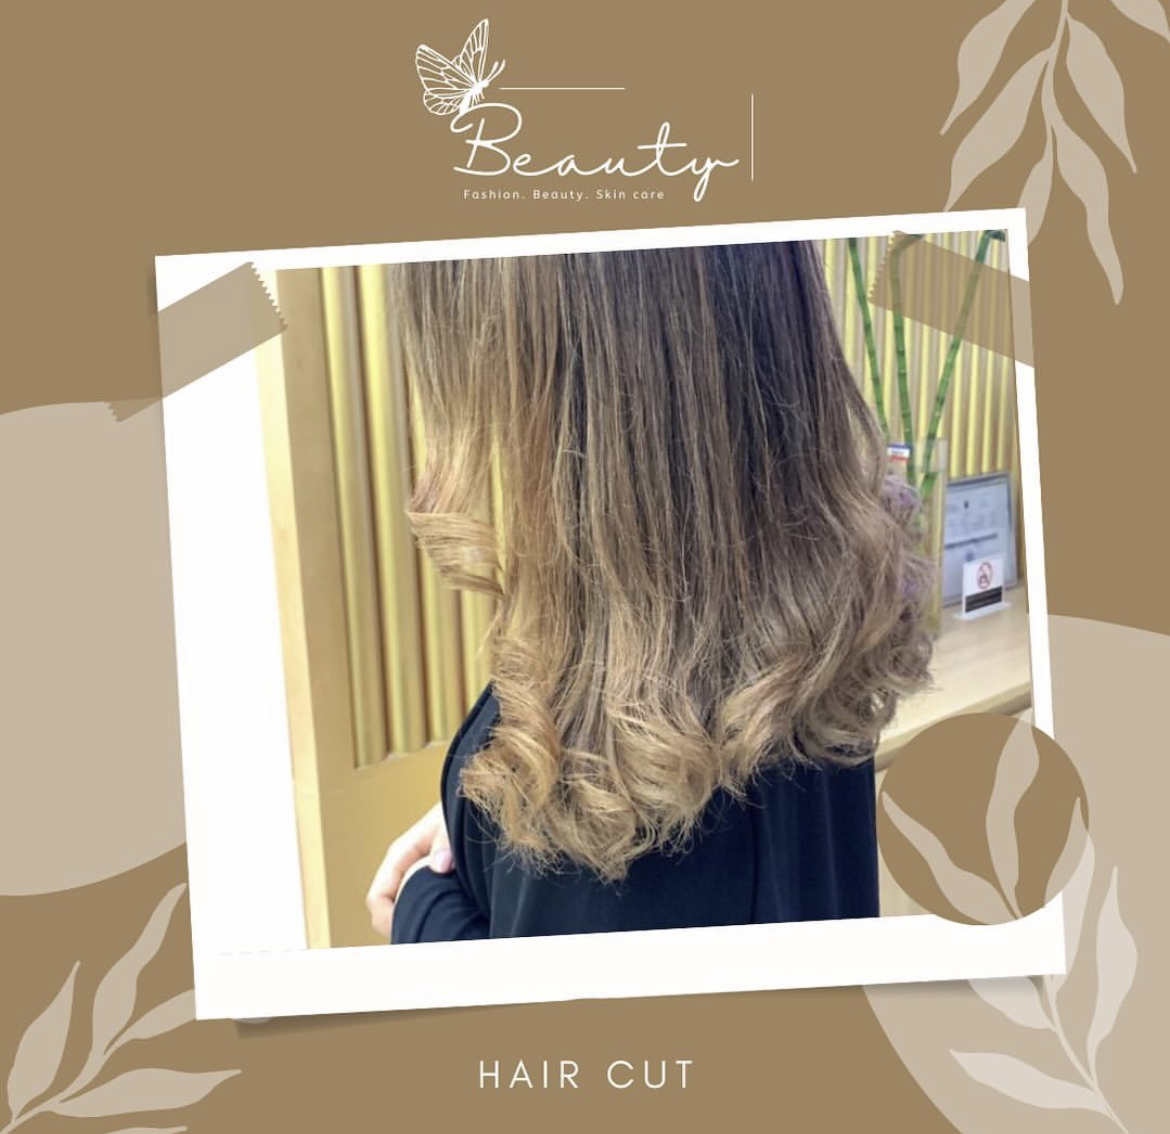 Hair colour - highlights start from